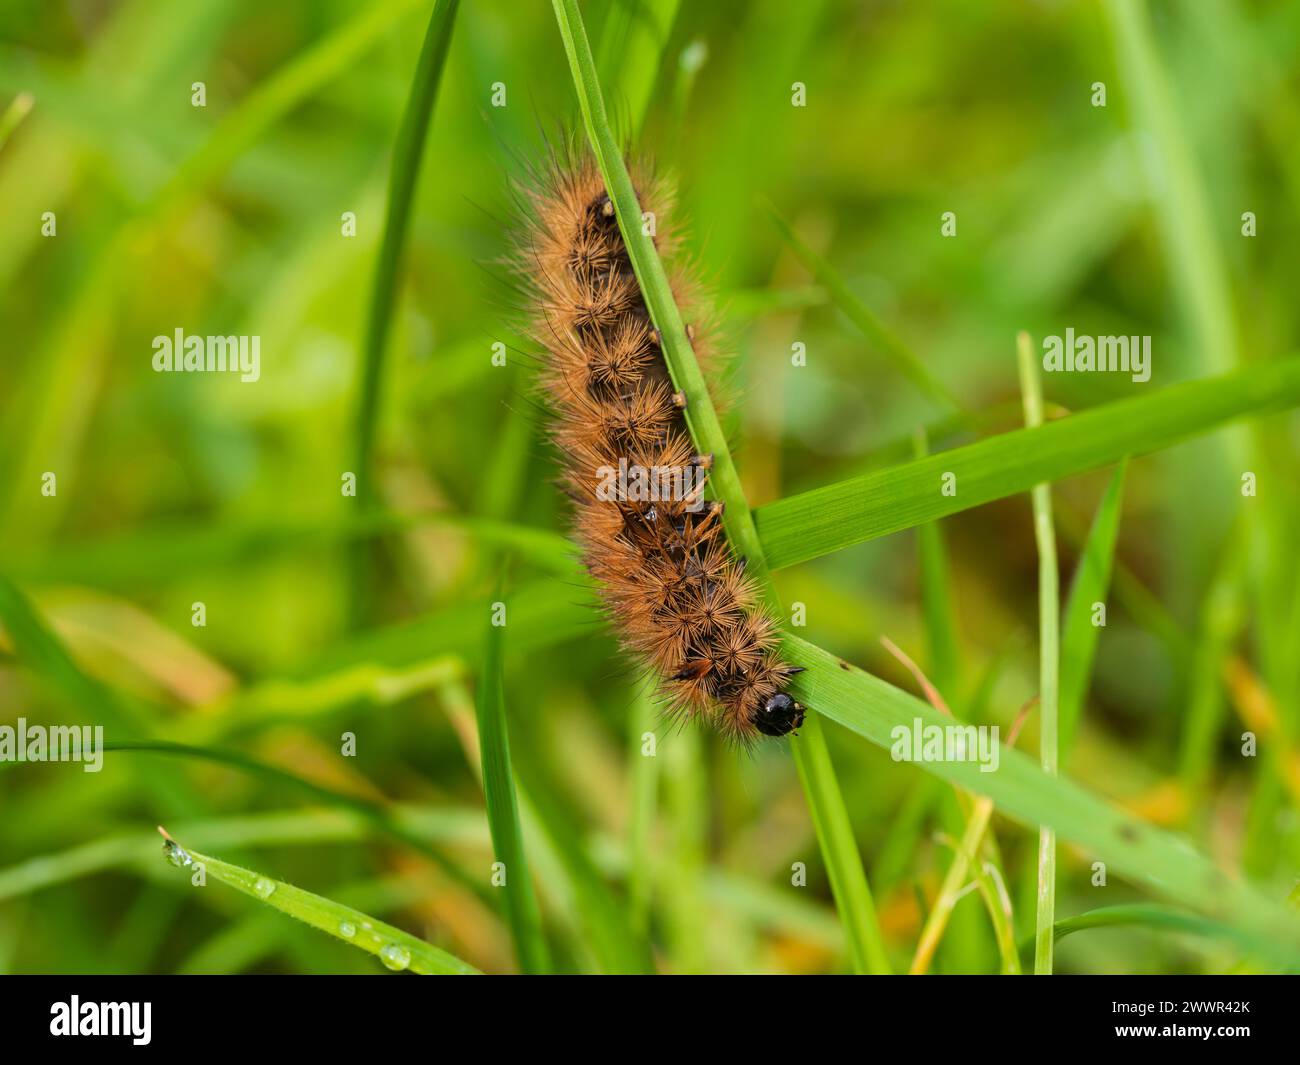 Over wintered caterpillar of Phragmatobia fuliginosa, the Ruby Tiger UK moth, resting on grasses in early spring. Stock Photo